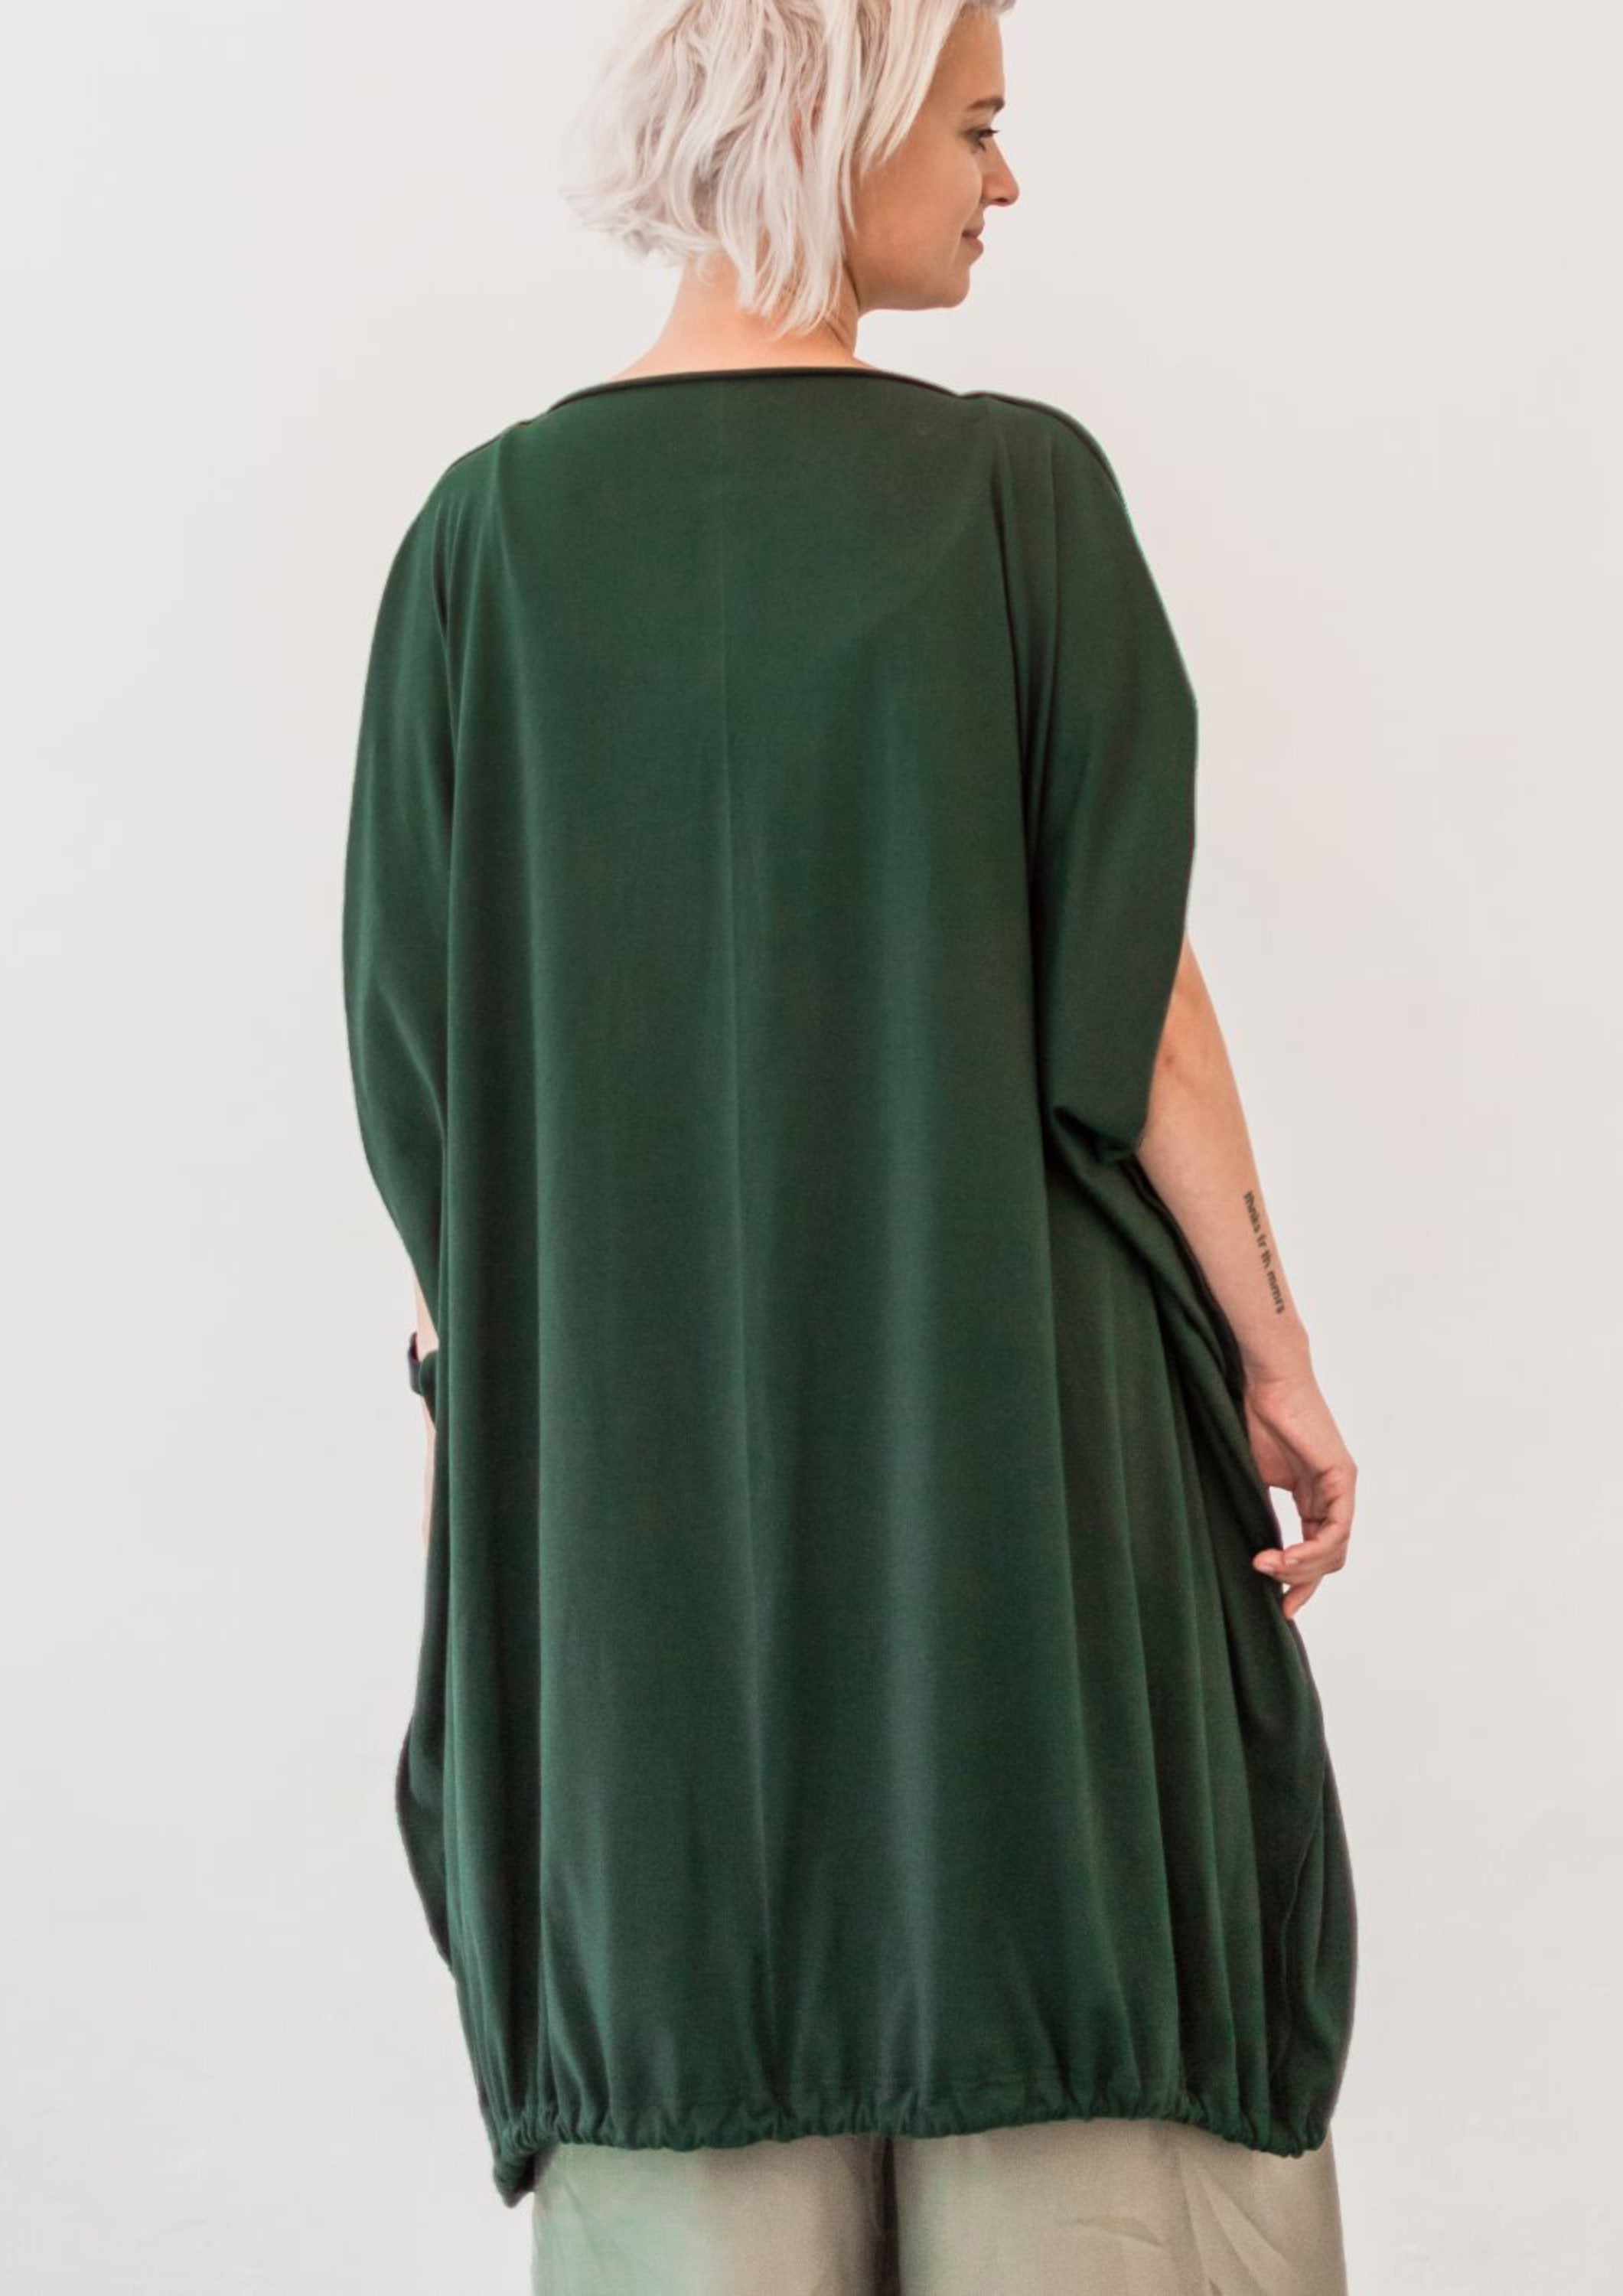 Multifunctional Wide dress in deep green. Can be worn as a dress, vest, poncho and blouse/top. Flowing and soft jersey, with adjustable draw-string to regulate the shape.